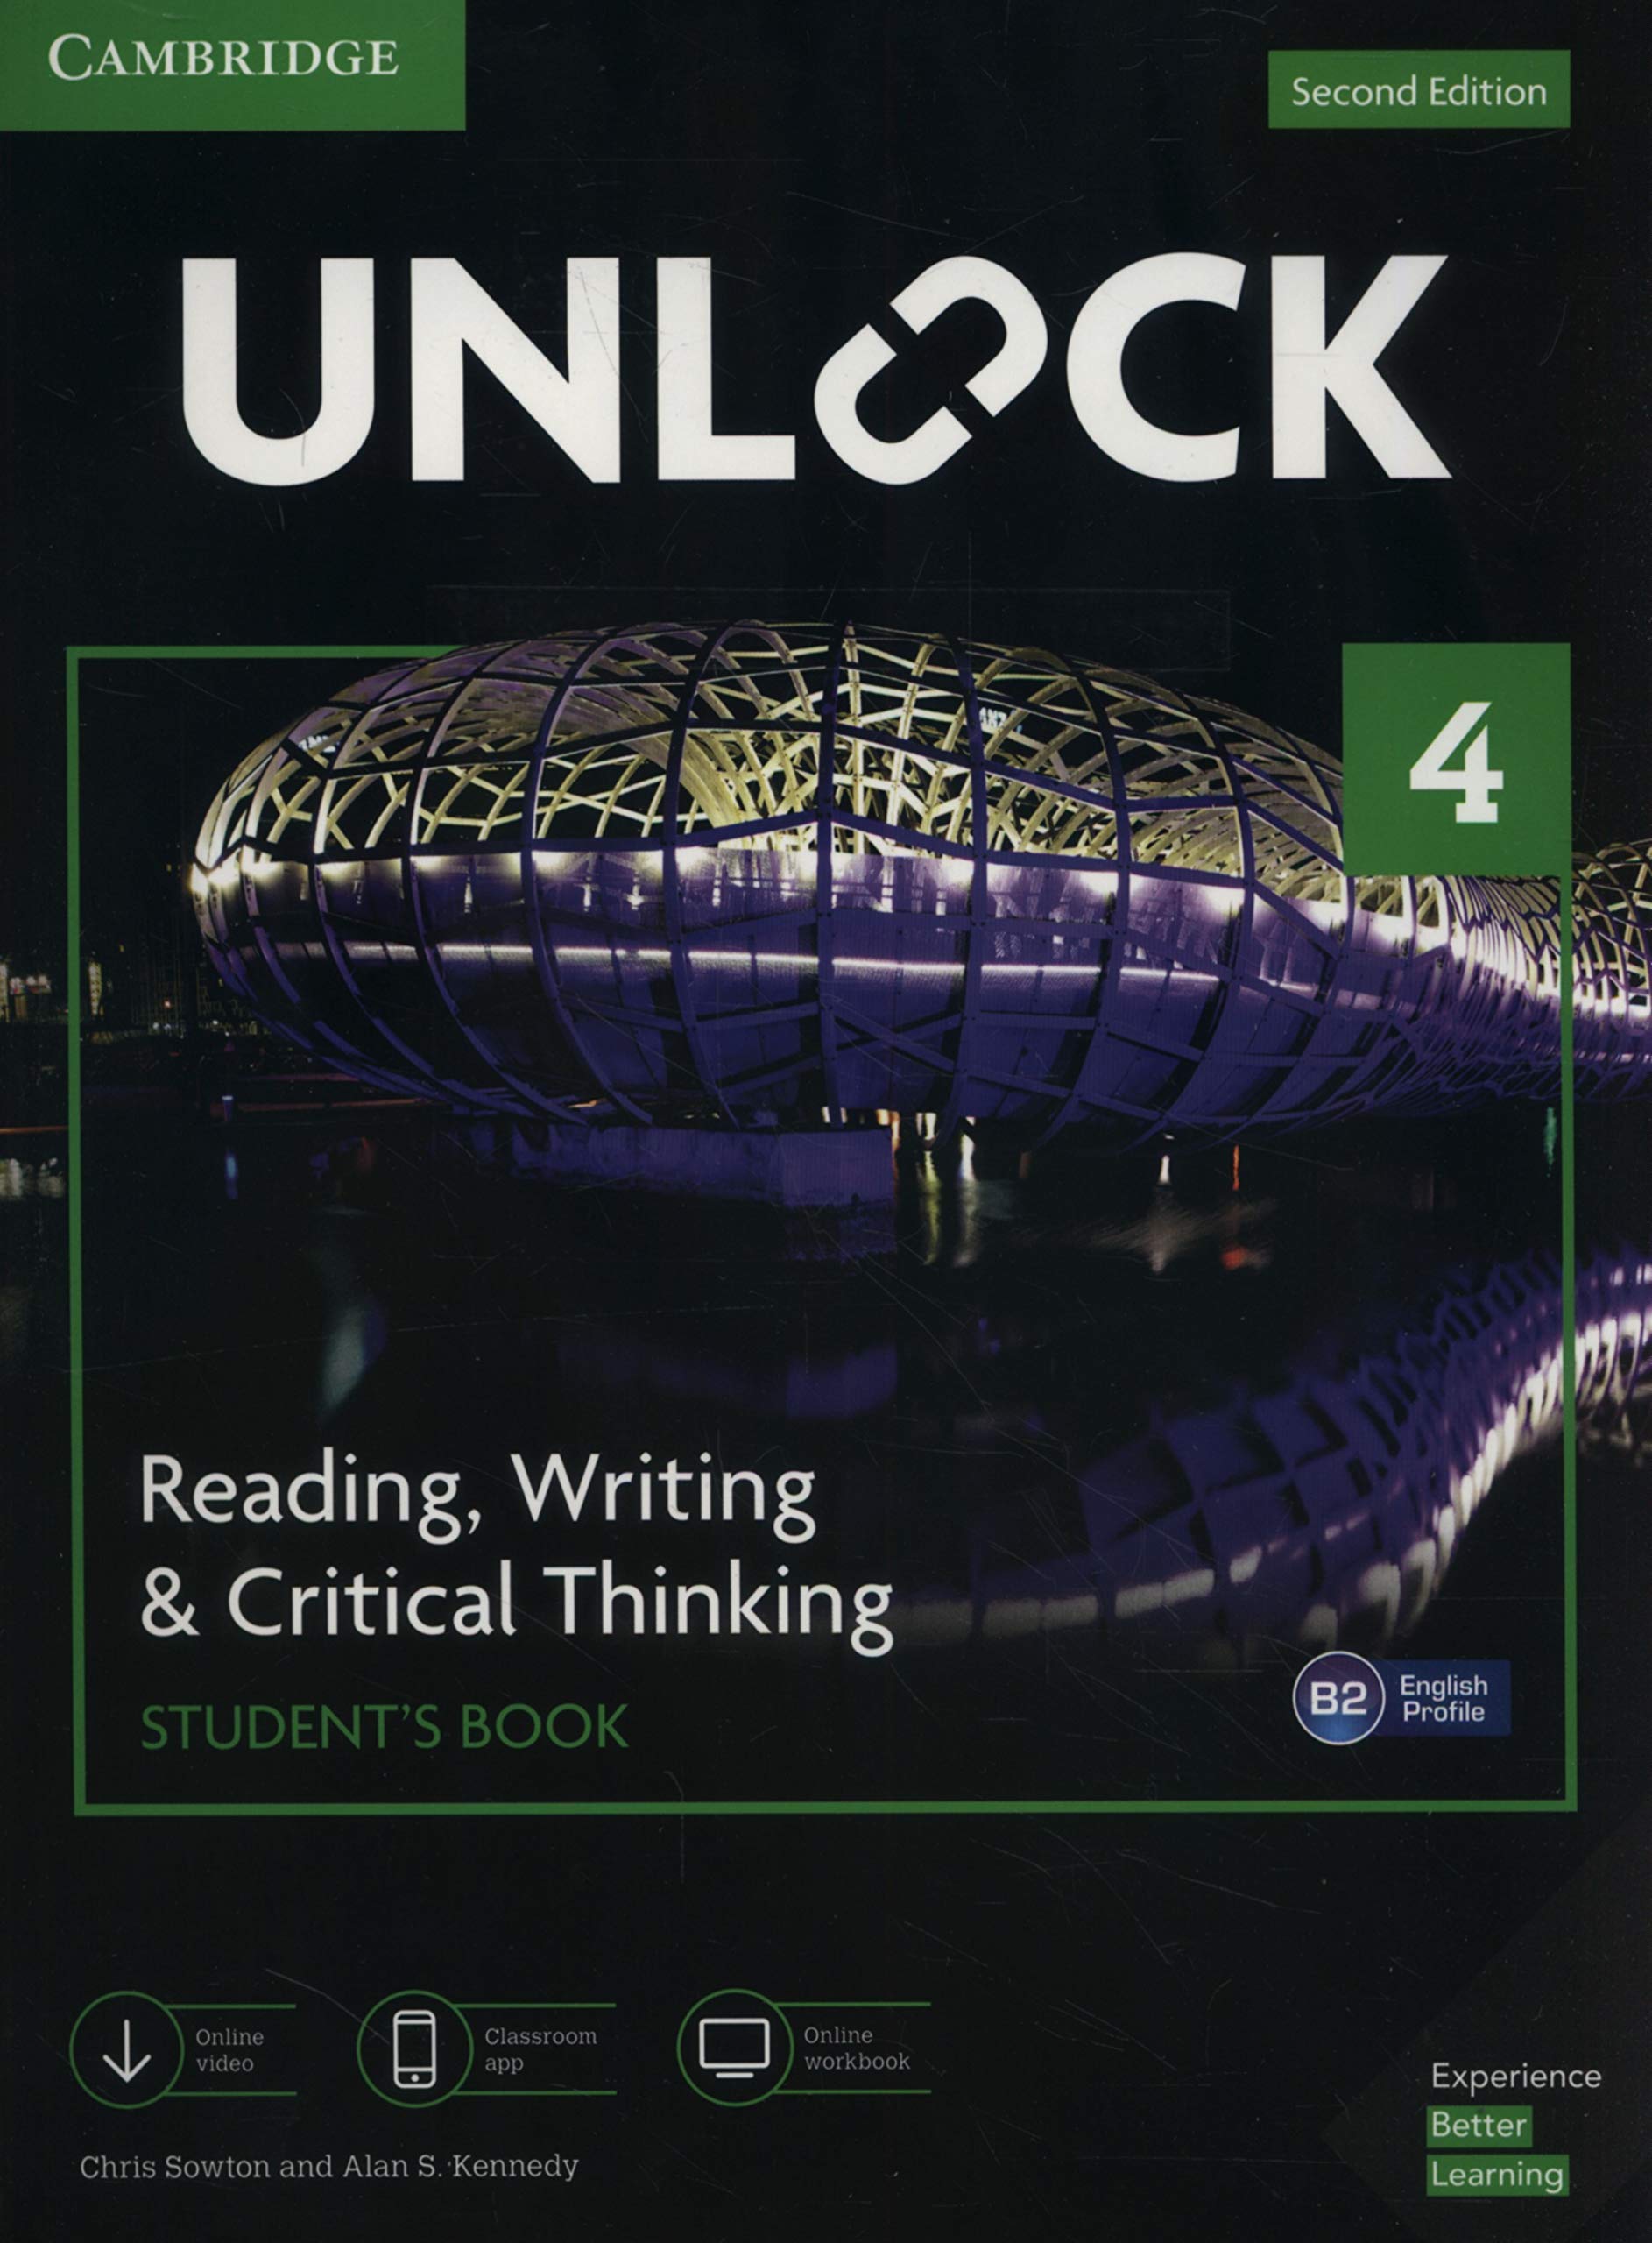 UNLOCK 4 Reading, Writing, & Critical Thinking Students Book, Mob App And Online Workbook W/ D